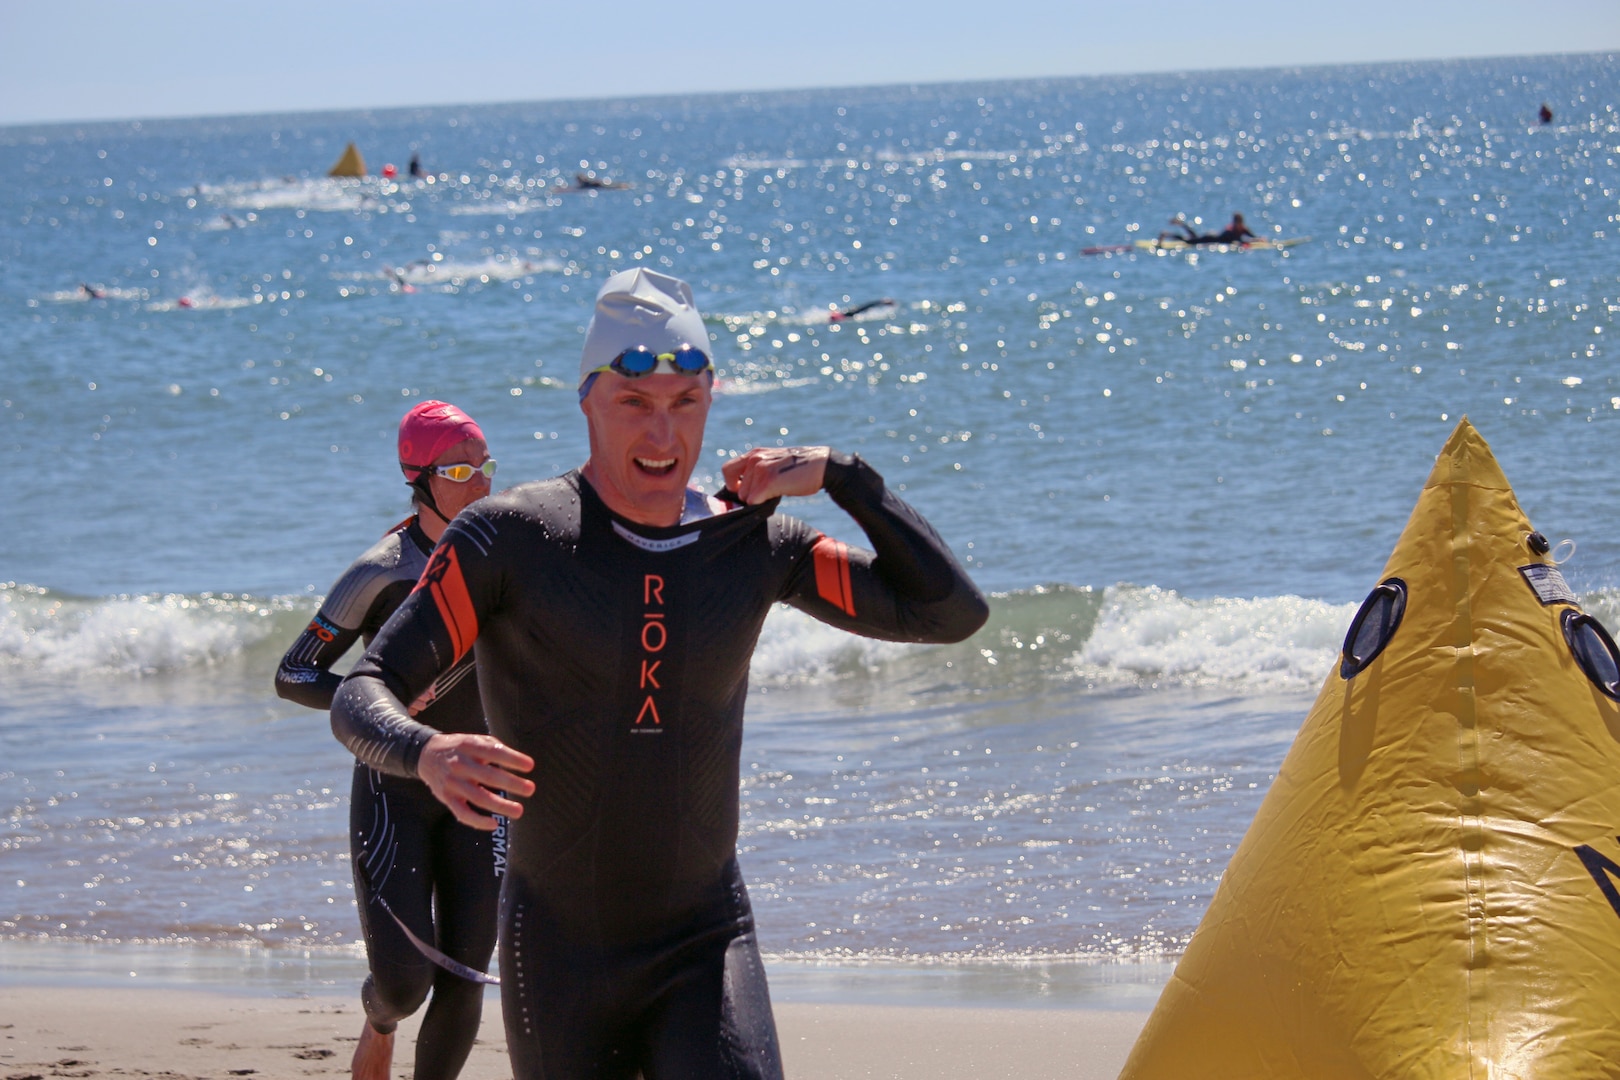 Navy Lt. Cmdr Kyle Hooker leads the pack out of the water during the 2023 Armed Forces Triathlon Championship hosted by Naval Base Ventura County, California on April 1.  The Armed Forces Championship features teams from the Army, Marine Corps, Navy (with Coast Guard runners), and Air Force (with Space Force Runners).  Department of Defense Photo by Mr. Steven Dinote - Released.